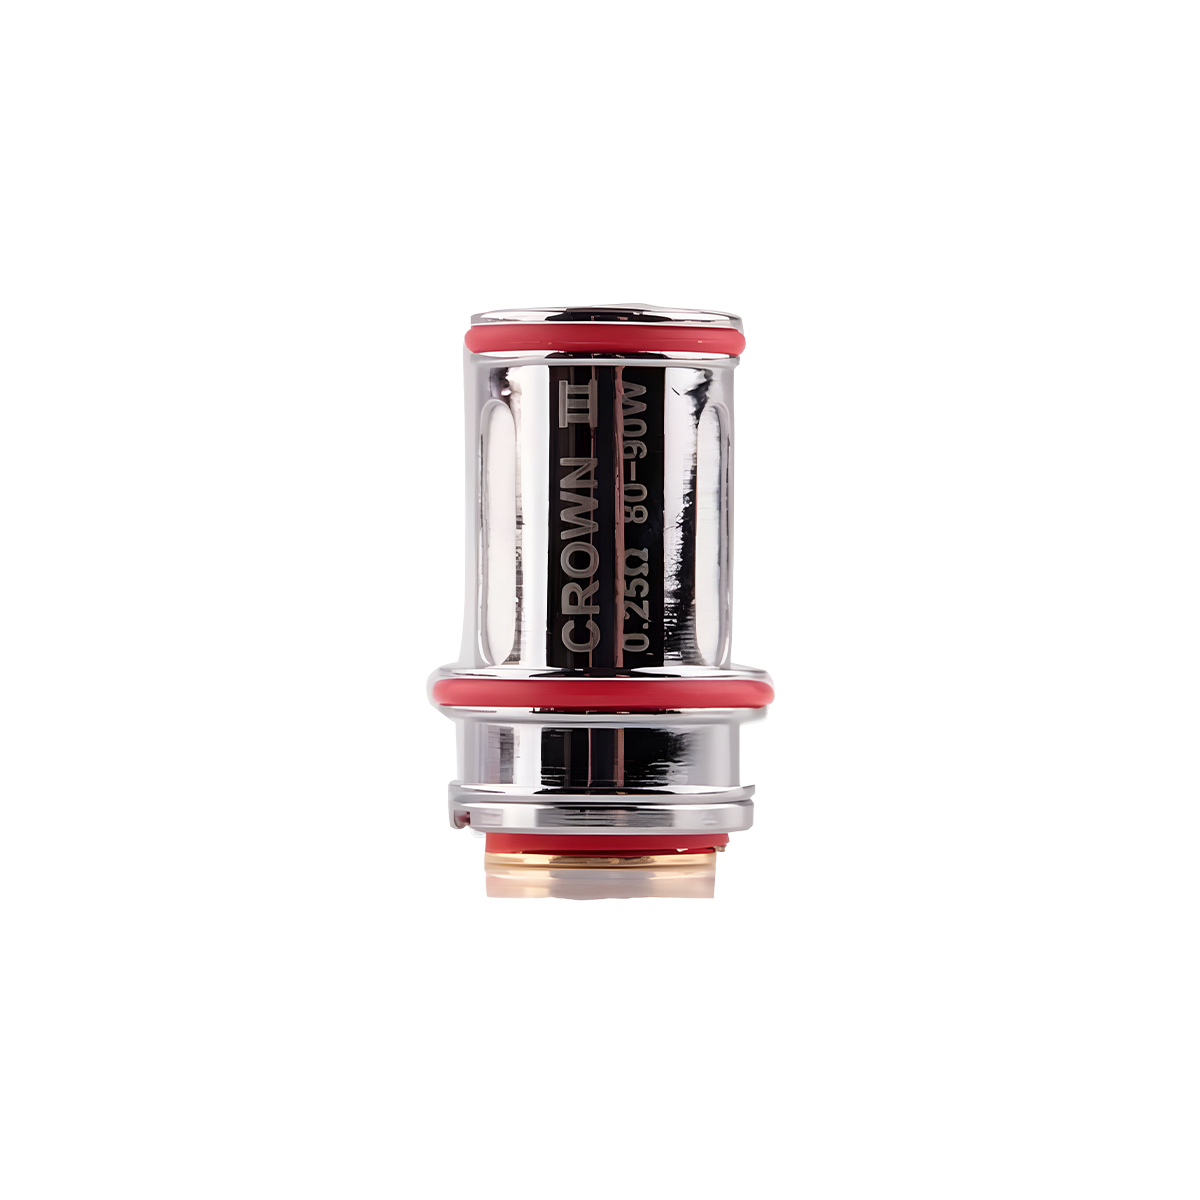 Uwell Crown 3 Replacement Coils 0.25 Ω  